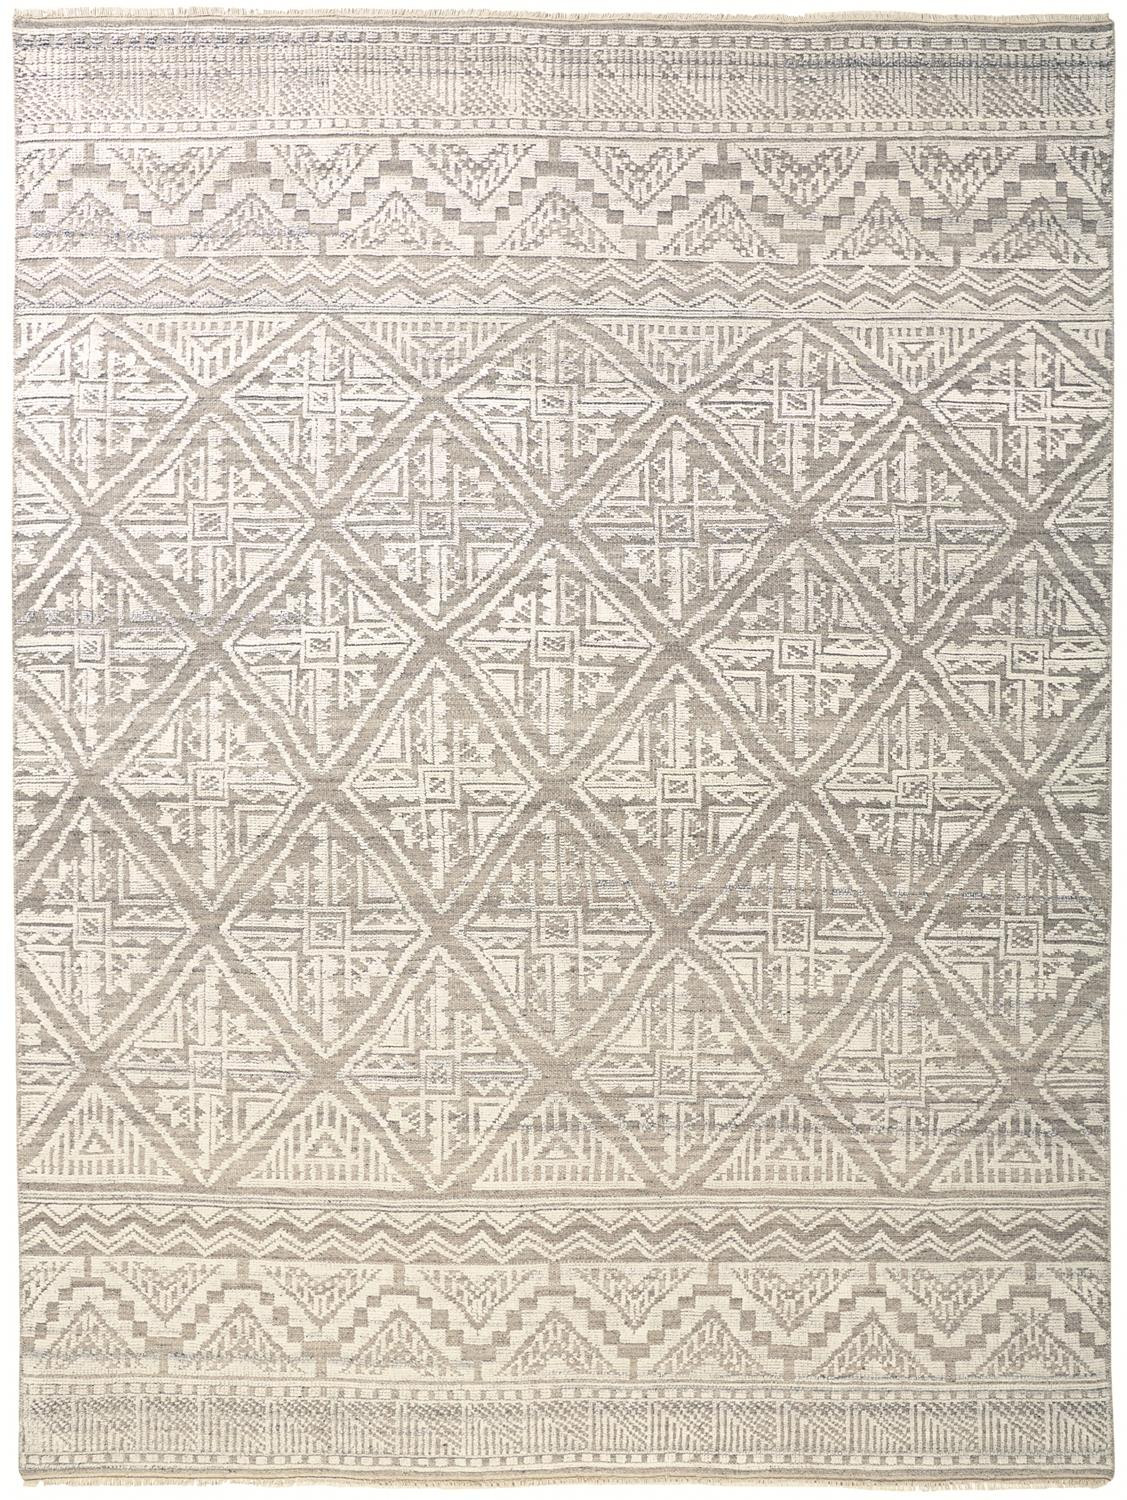 9' X 12' Ivory Tan And Gray Geometric Hand Knotted Area Rug-512583-1